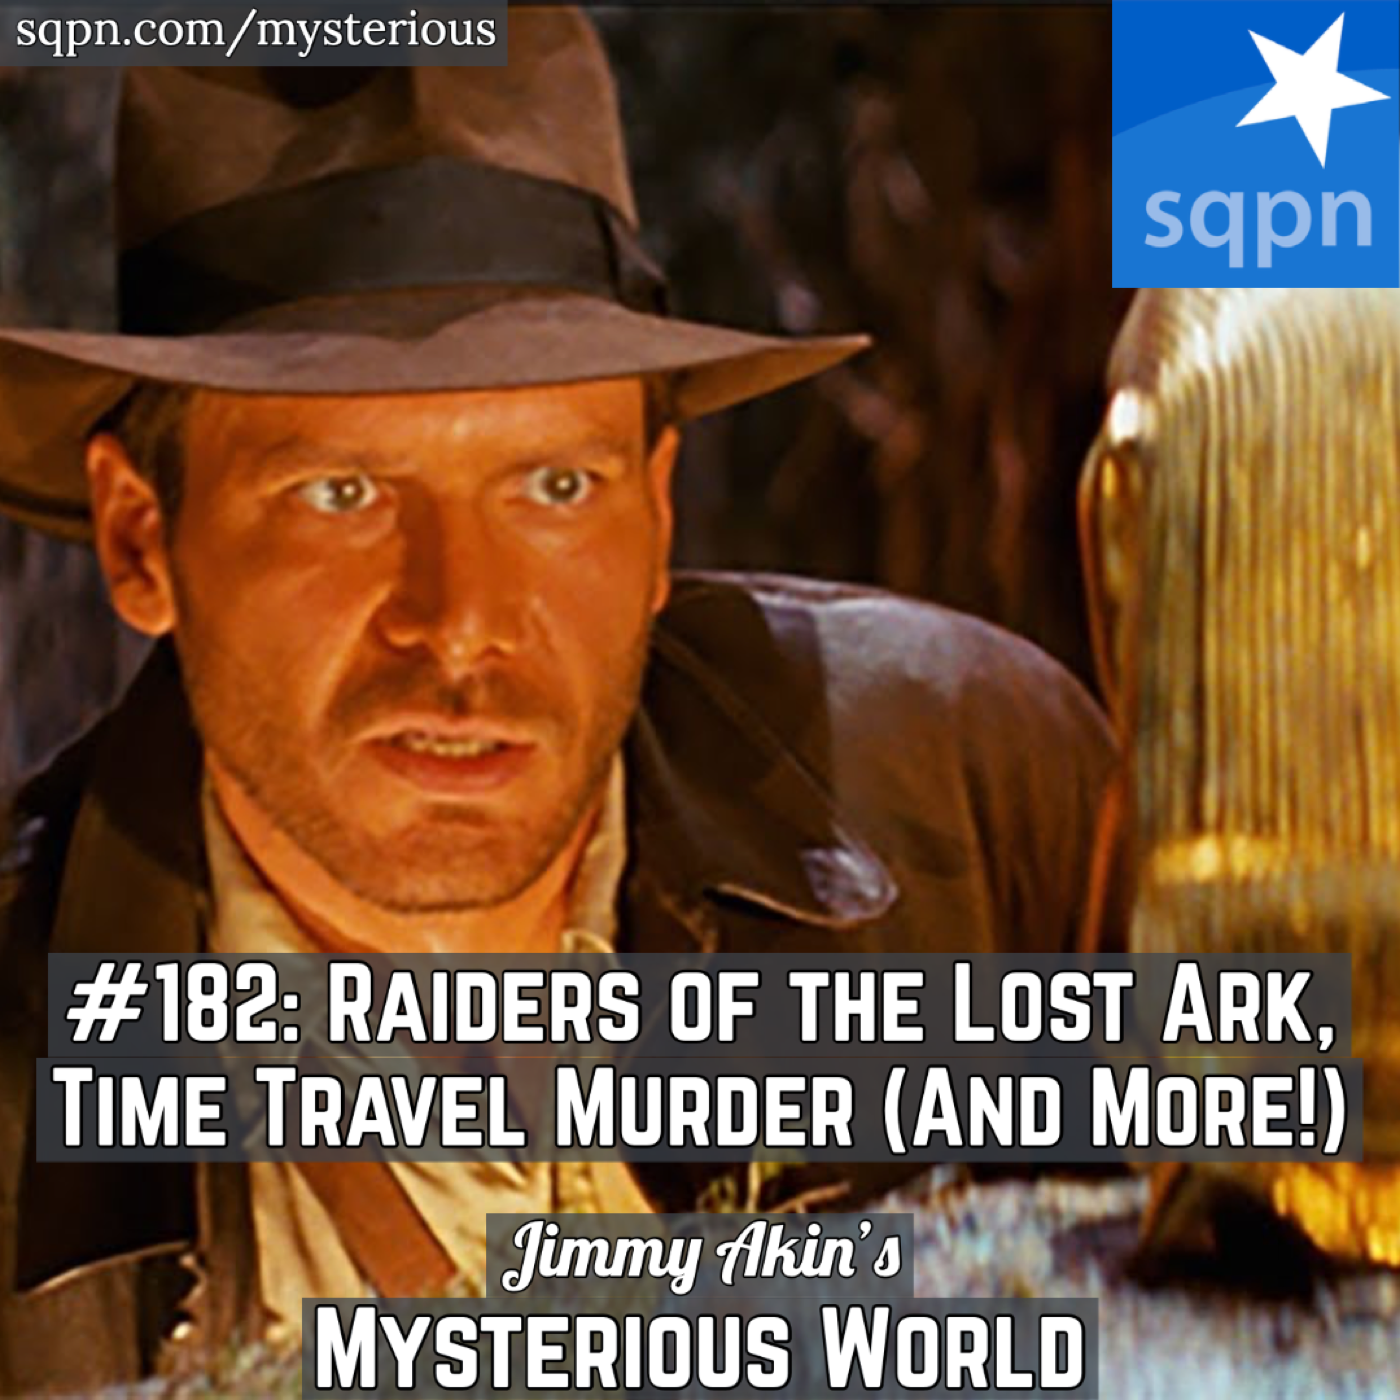 Raiders of the Lost Ark, Time Travel Murder, Jesus’ Y Chromosome, Two Popes? & More Weird Questions